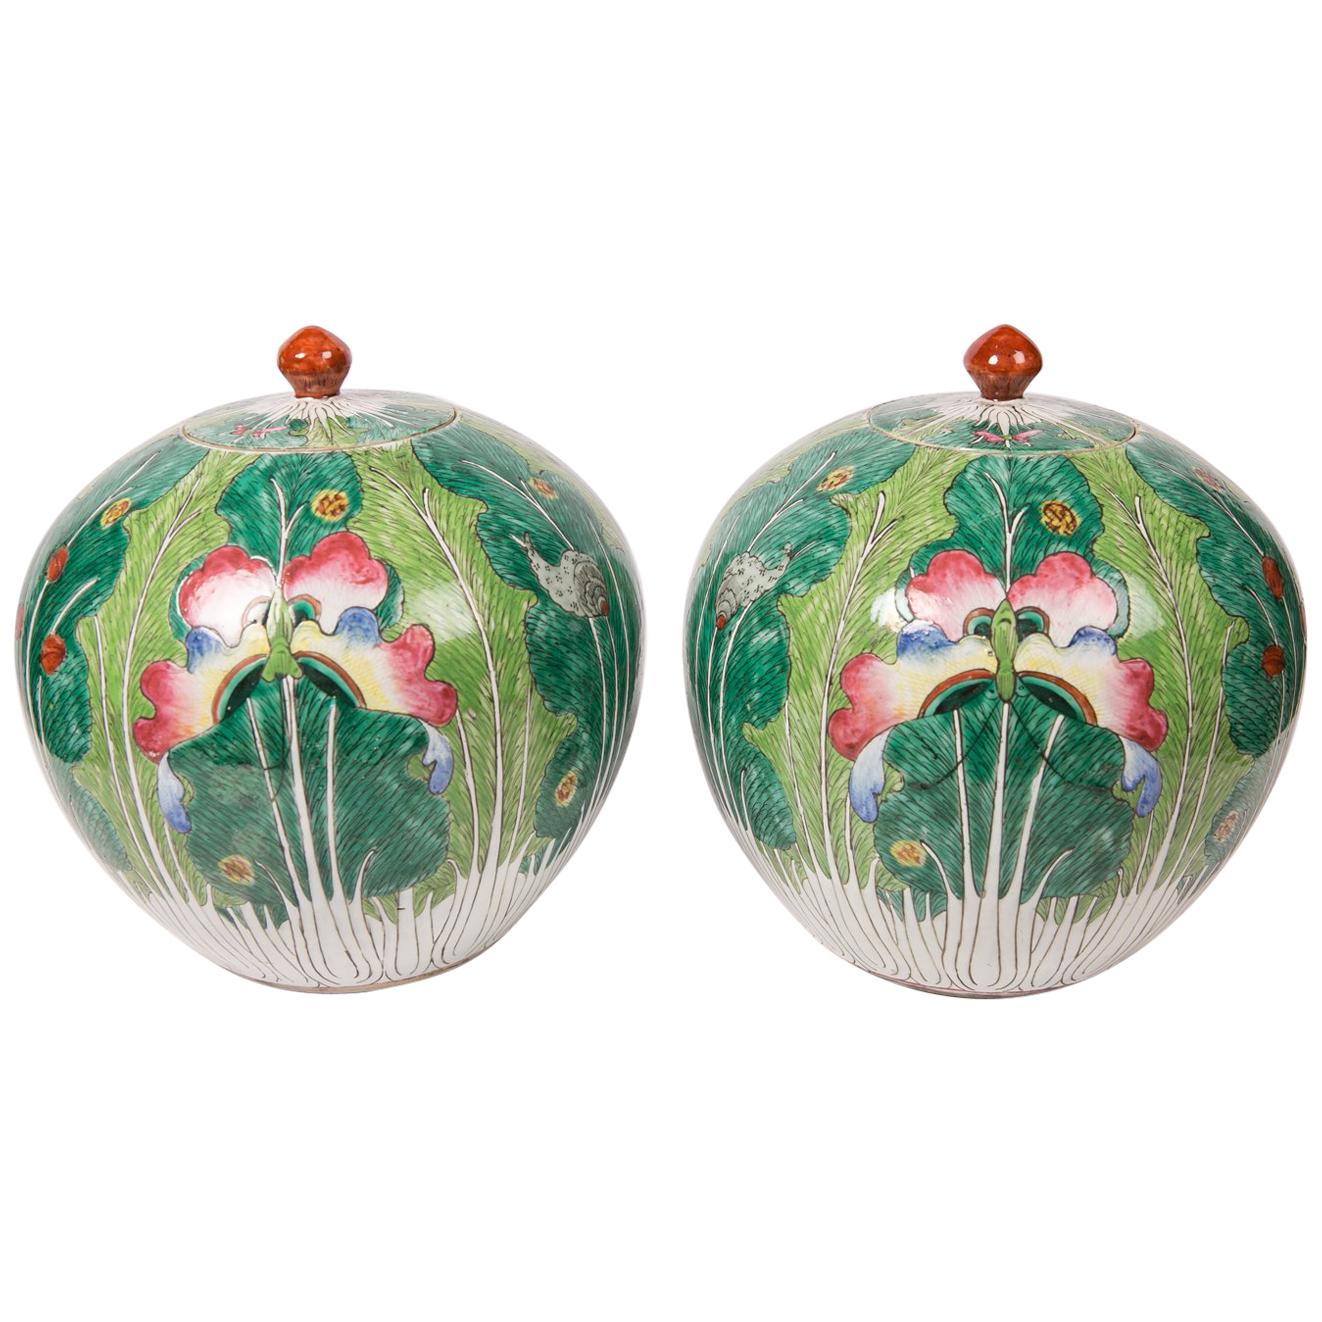 Pair Chinese Ginger Jars with Cabbage Decoration Xianfeng Reign (1831-1860)